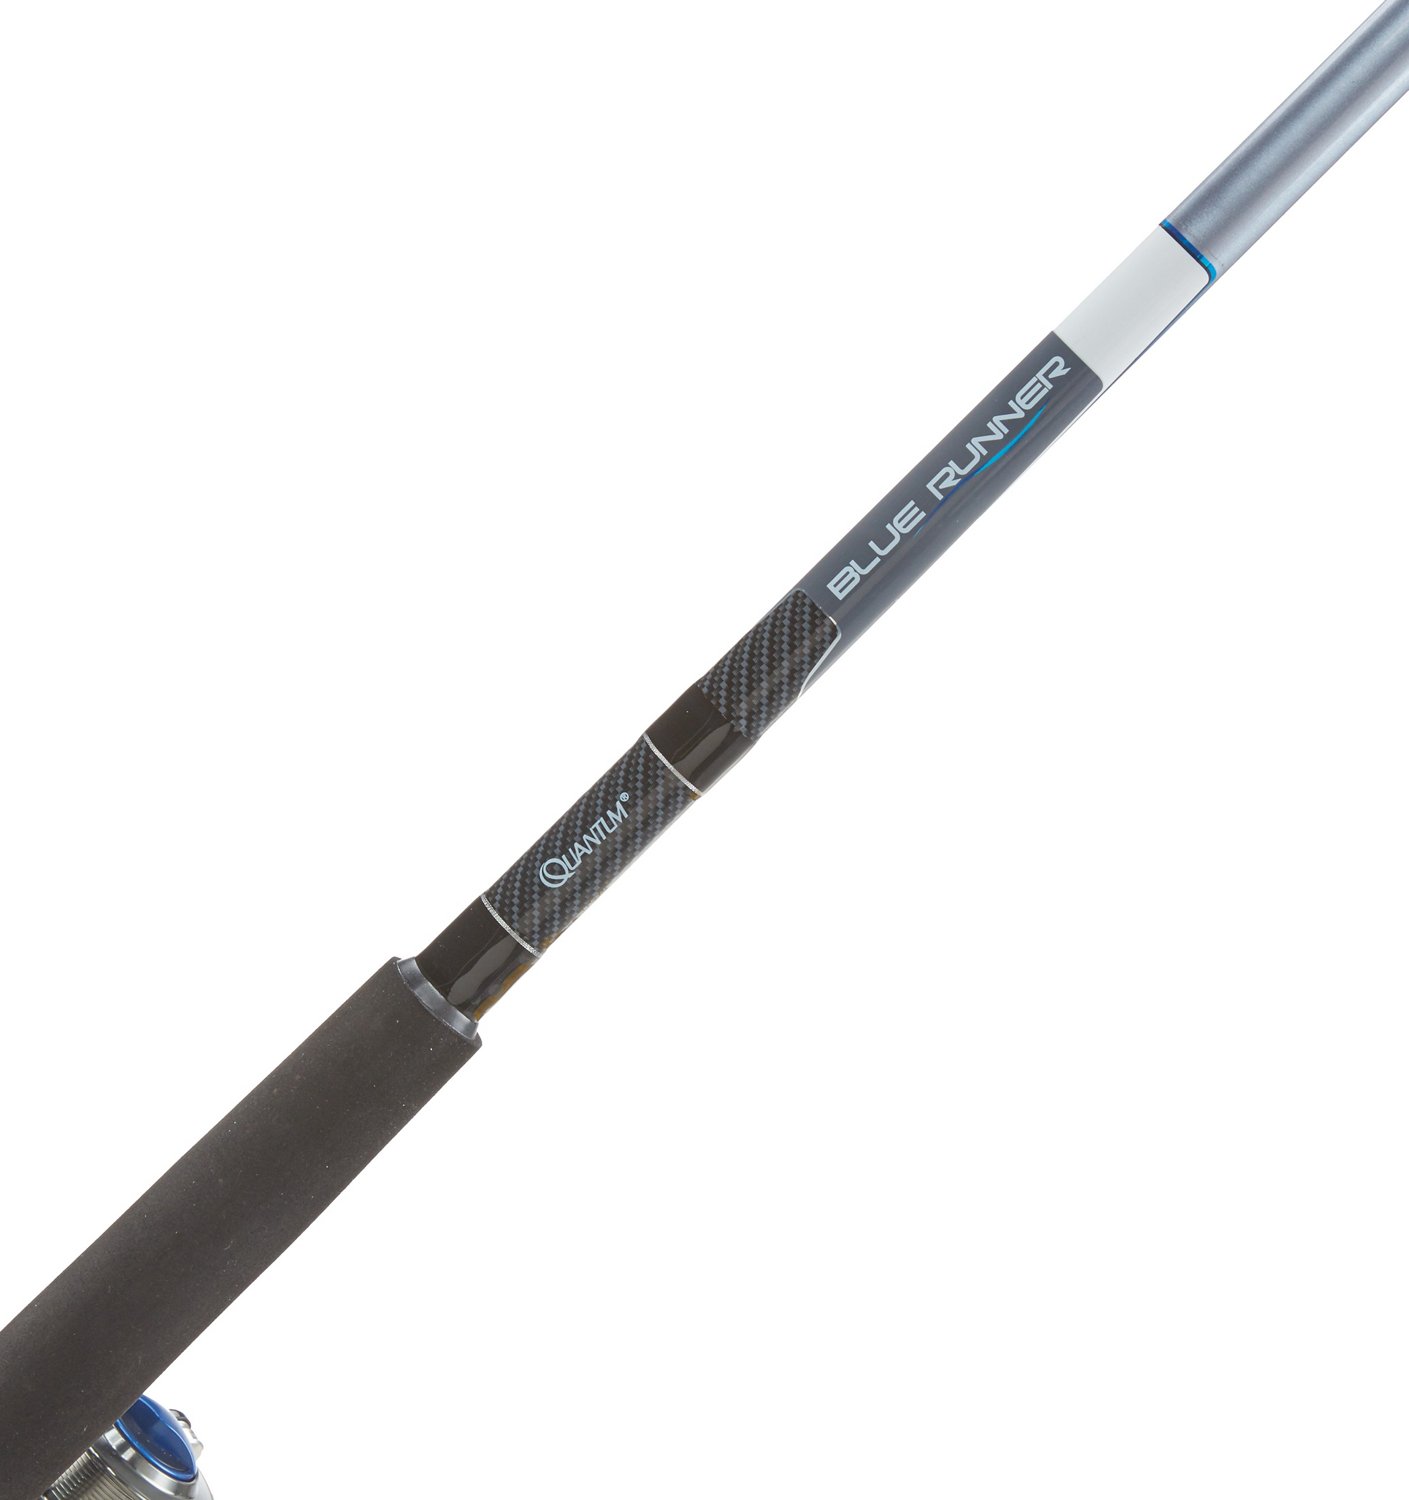  Quantum Blue Runner Spinning Reel and Fishing Rod Combo,  10-Foot 2-Piece Fiberglass Fishing Pole, Extended EVA Handle, Medium-Heavy  Power, Size 60 Reel, Changeable Right- or Left-Hand Retrieve, Blue :  Everything Else